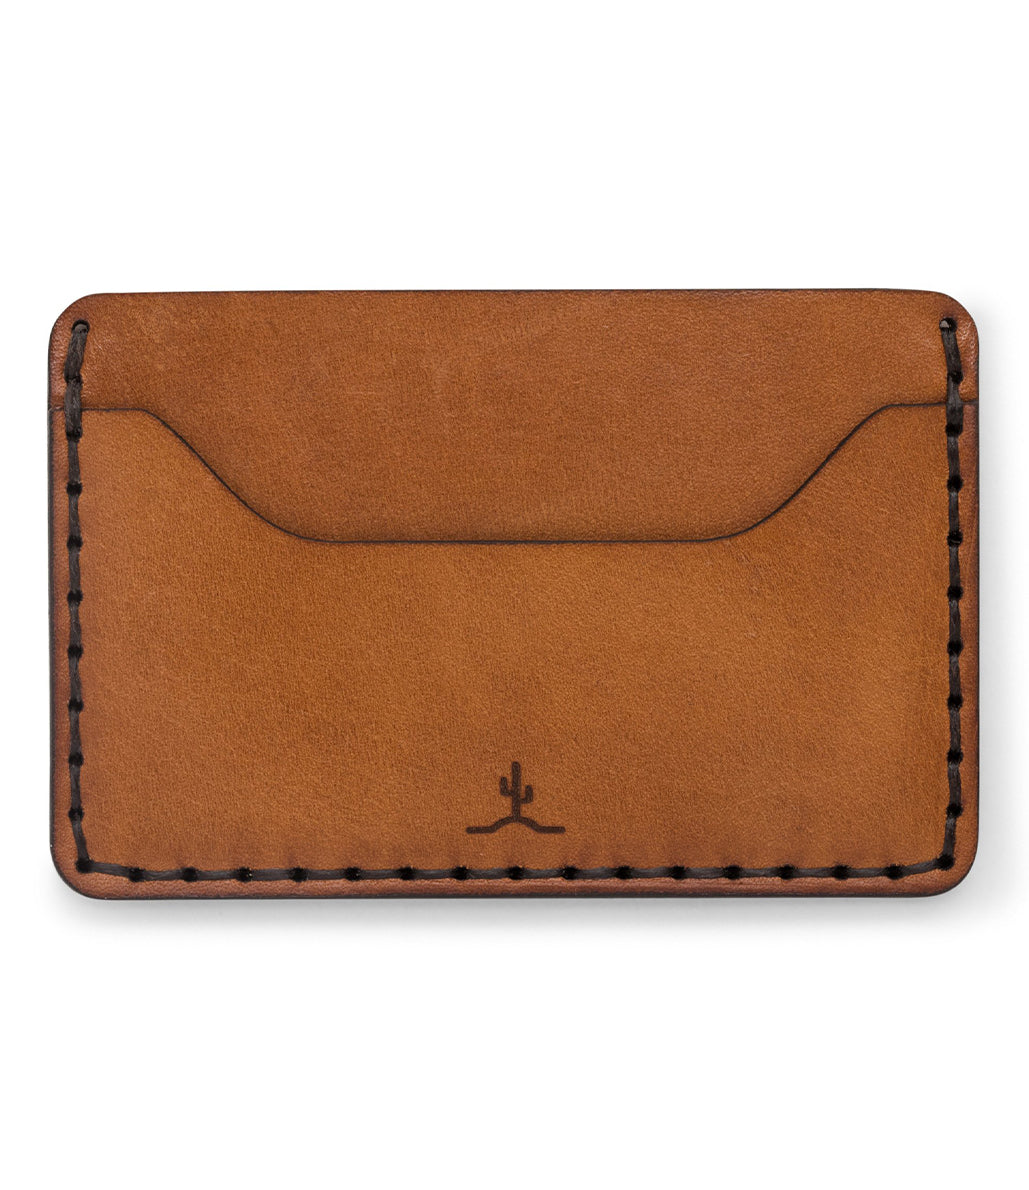 Buck brown leather 2 pocket wallet with center divider